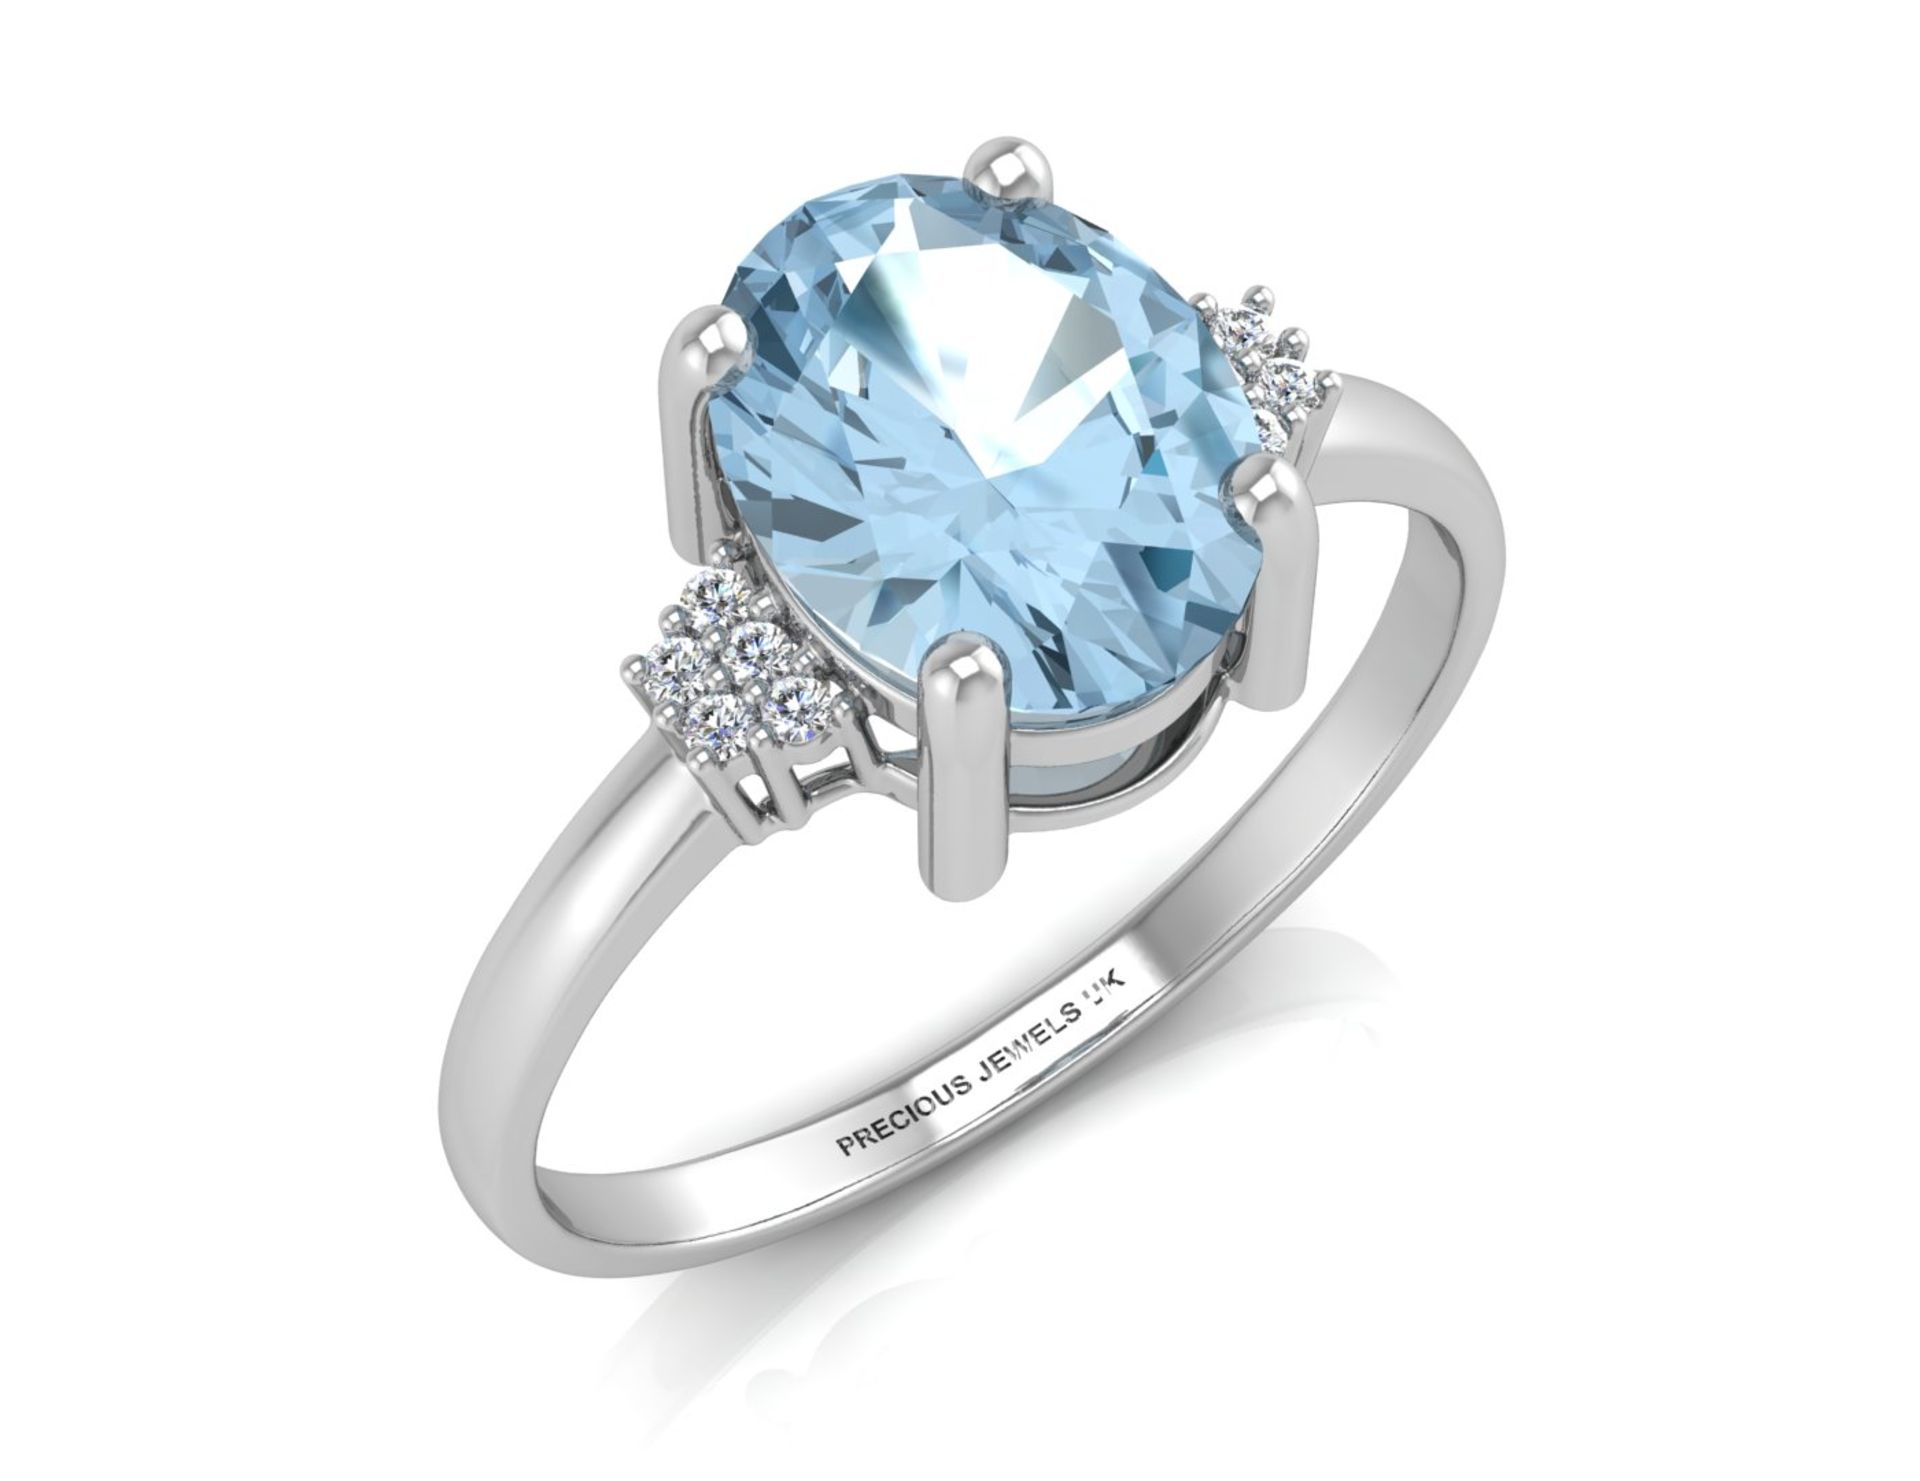 9ct White Gold Diamond And Blue Topaz Ring 0.03 Carats - Valued by AGI £795.00 - 9ct White Gold